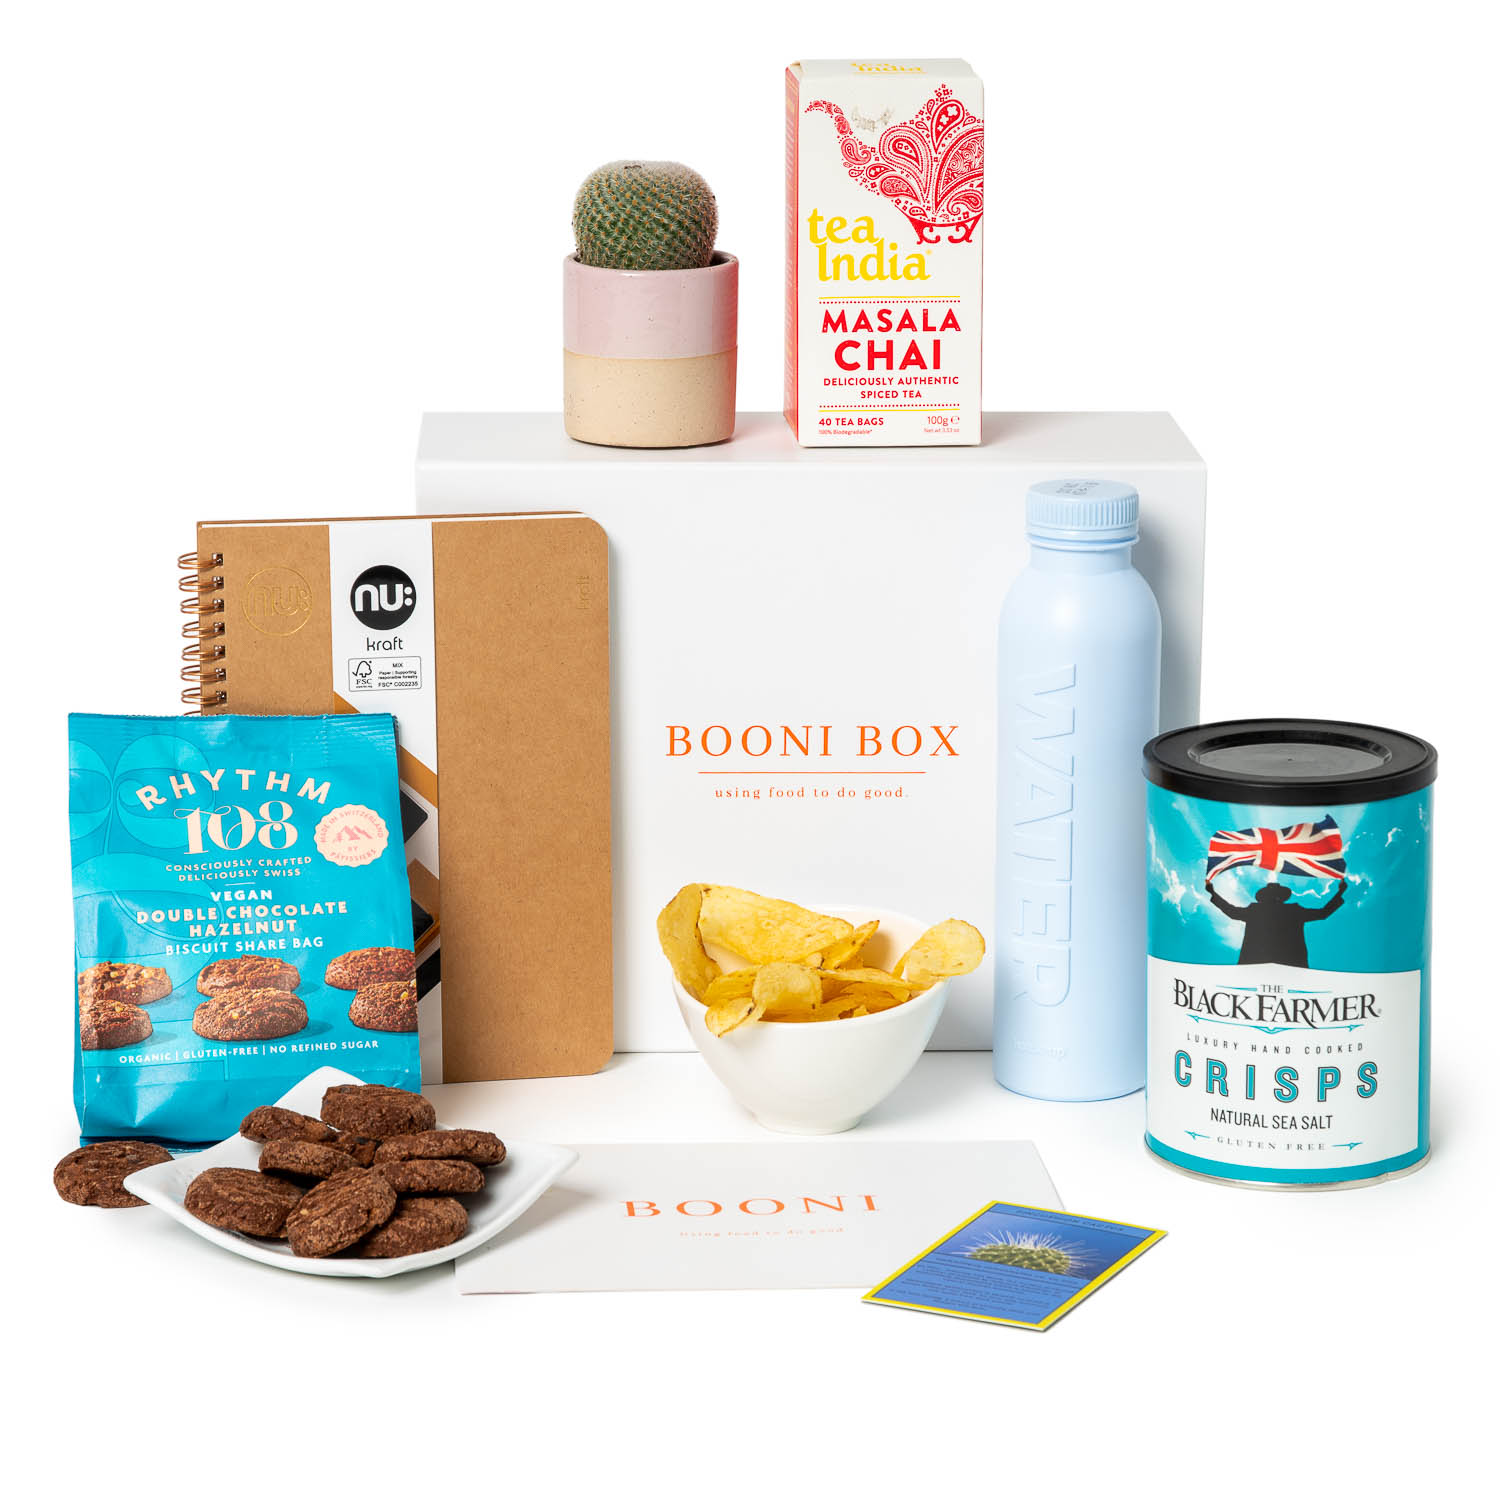 Booni Boxes